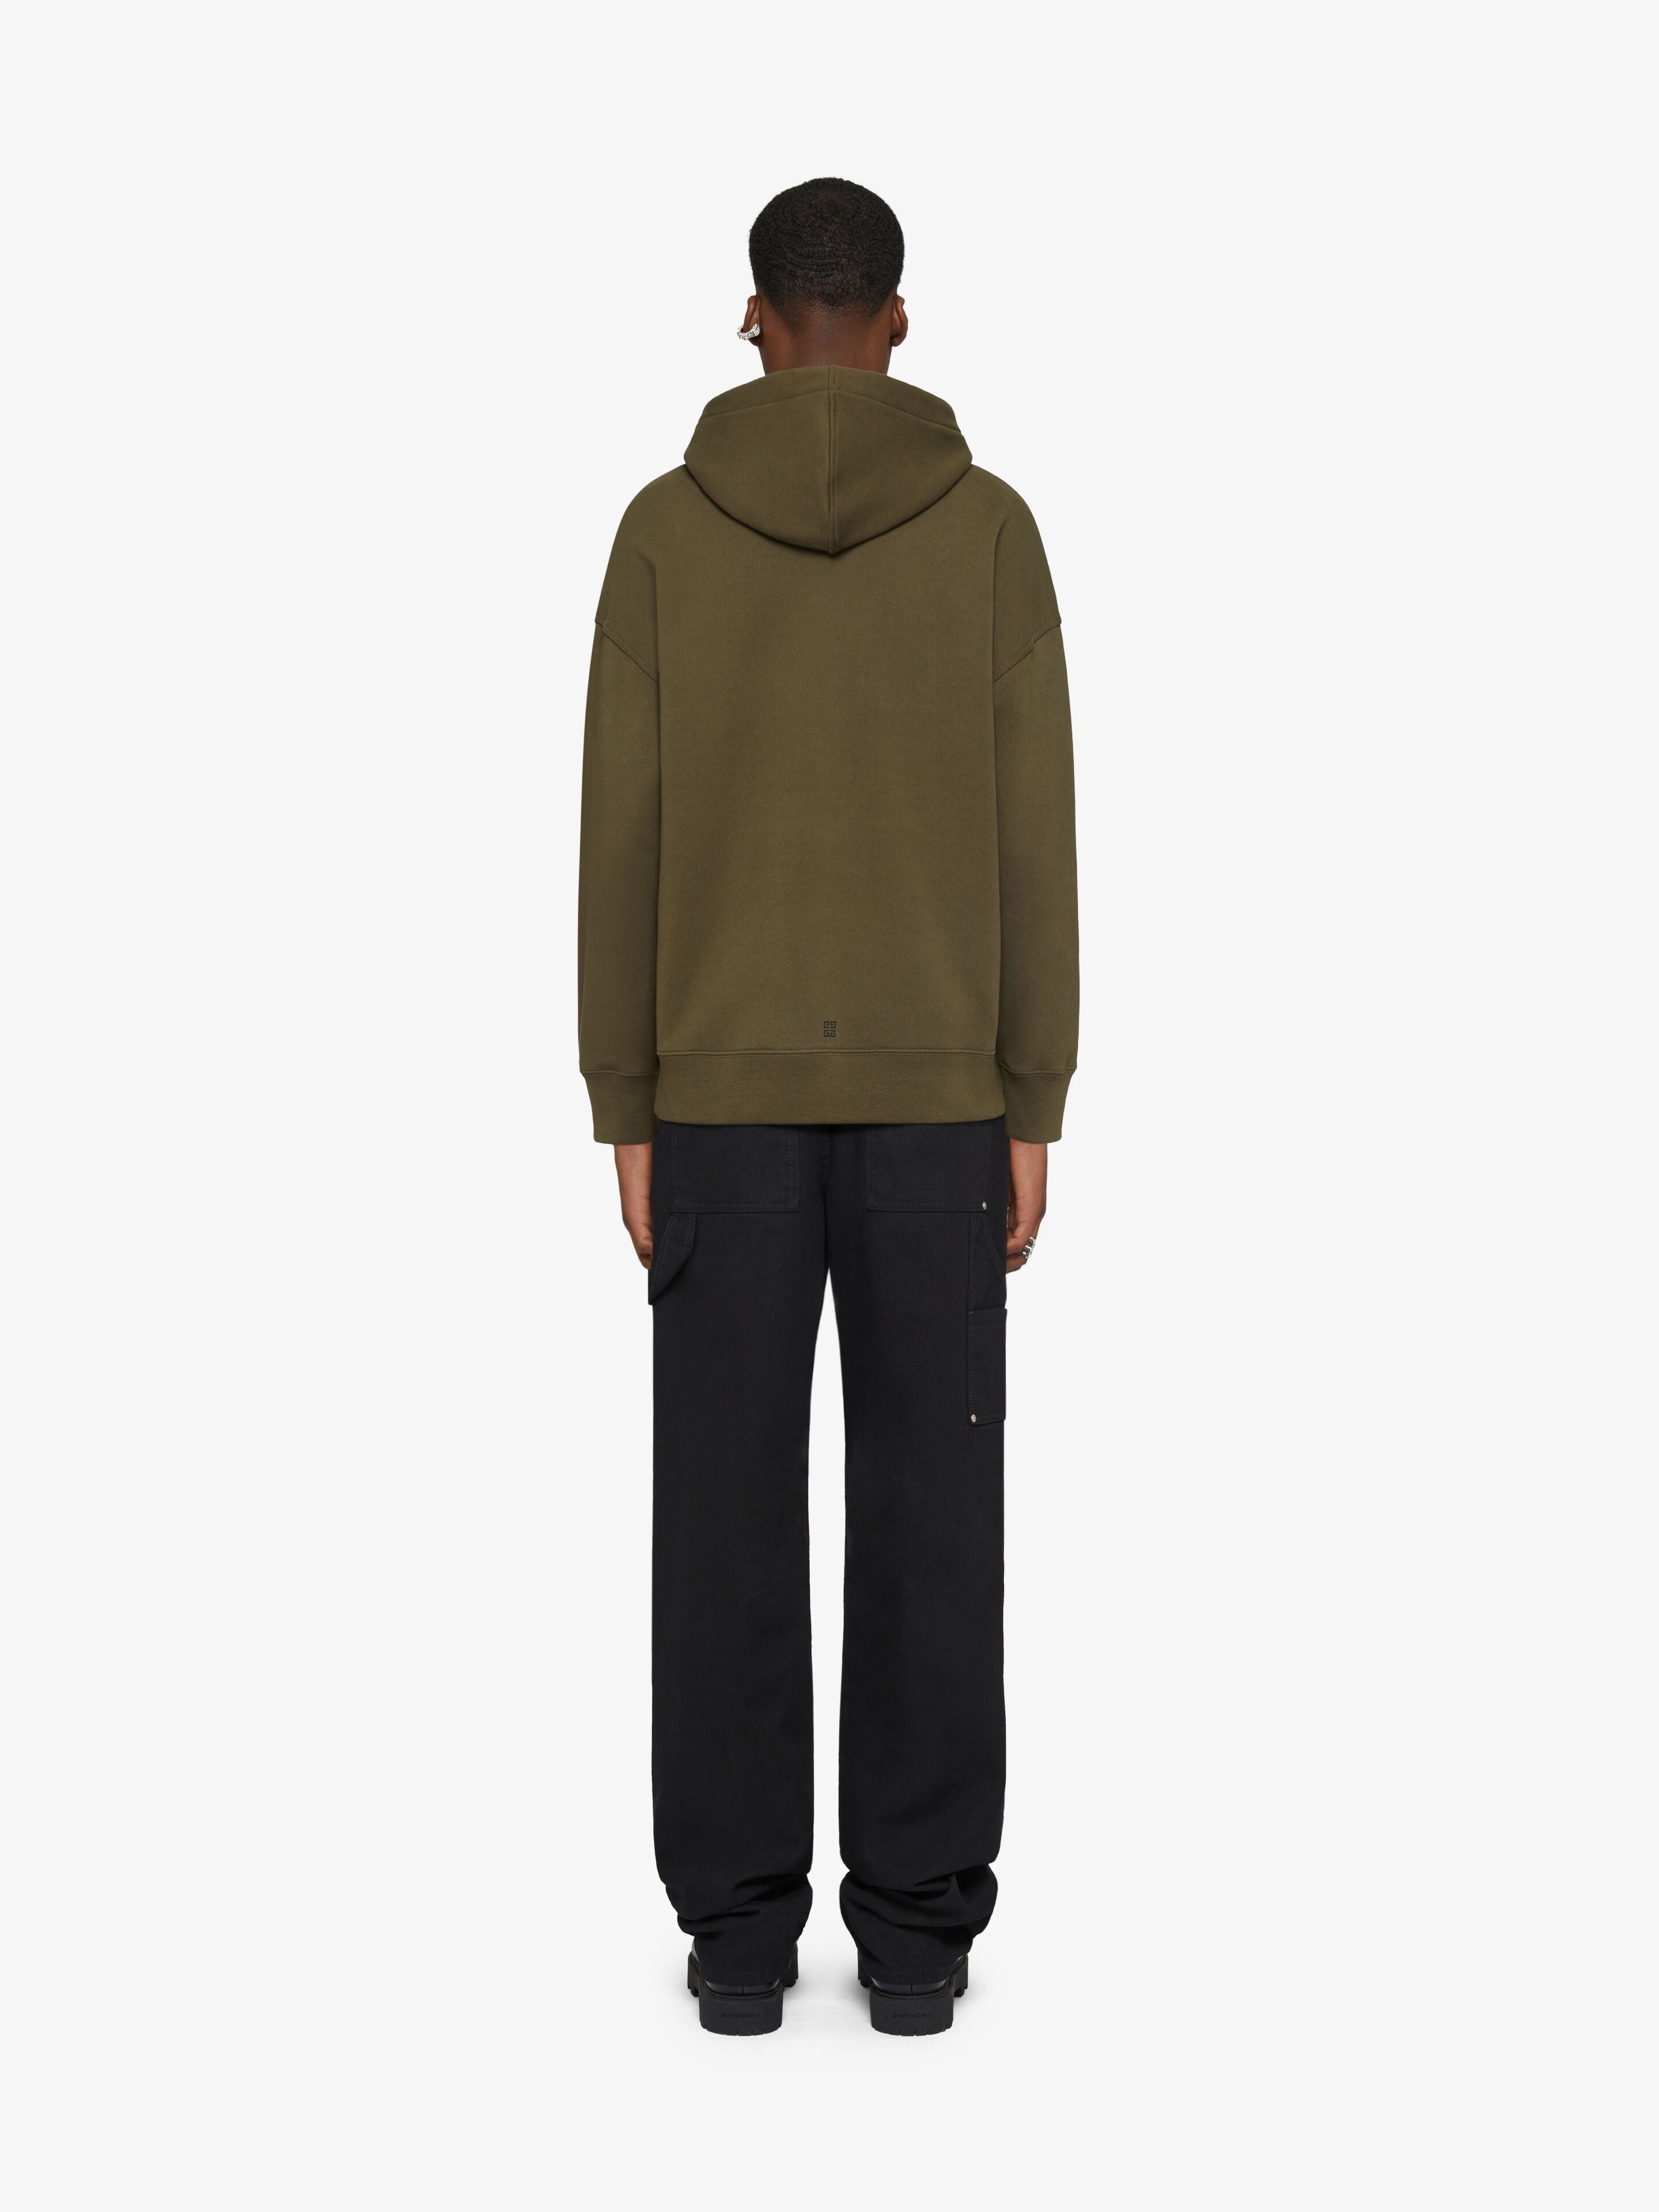 GIVENCHY ARCHETYPE SLIM FIT HOODIE IN FLEECE - 4